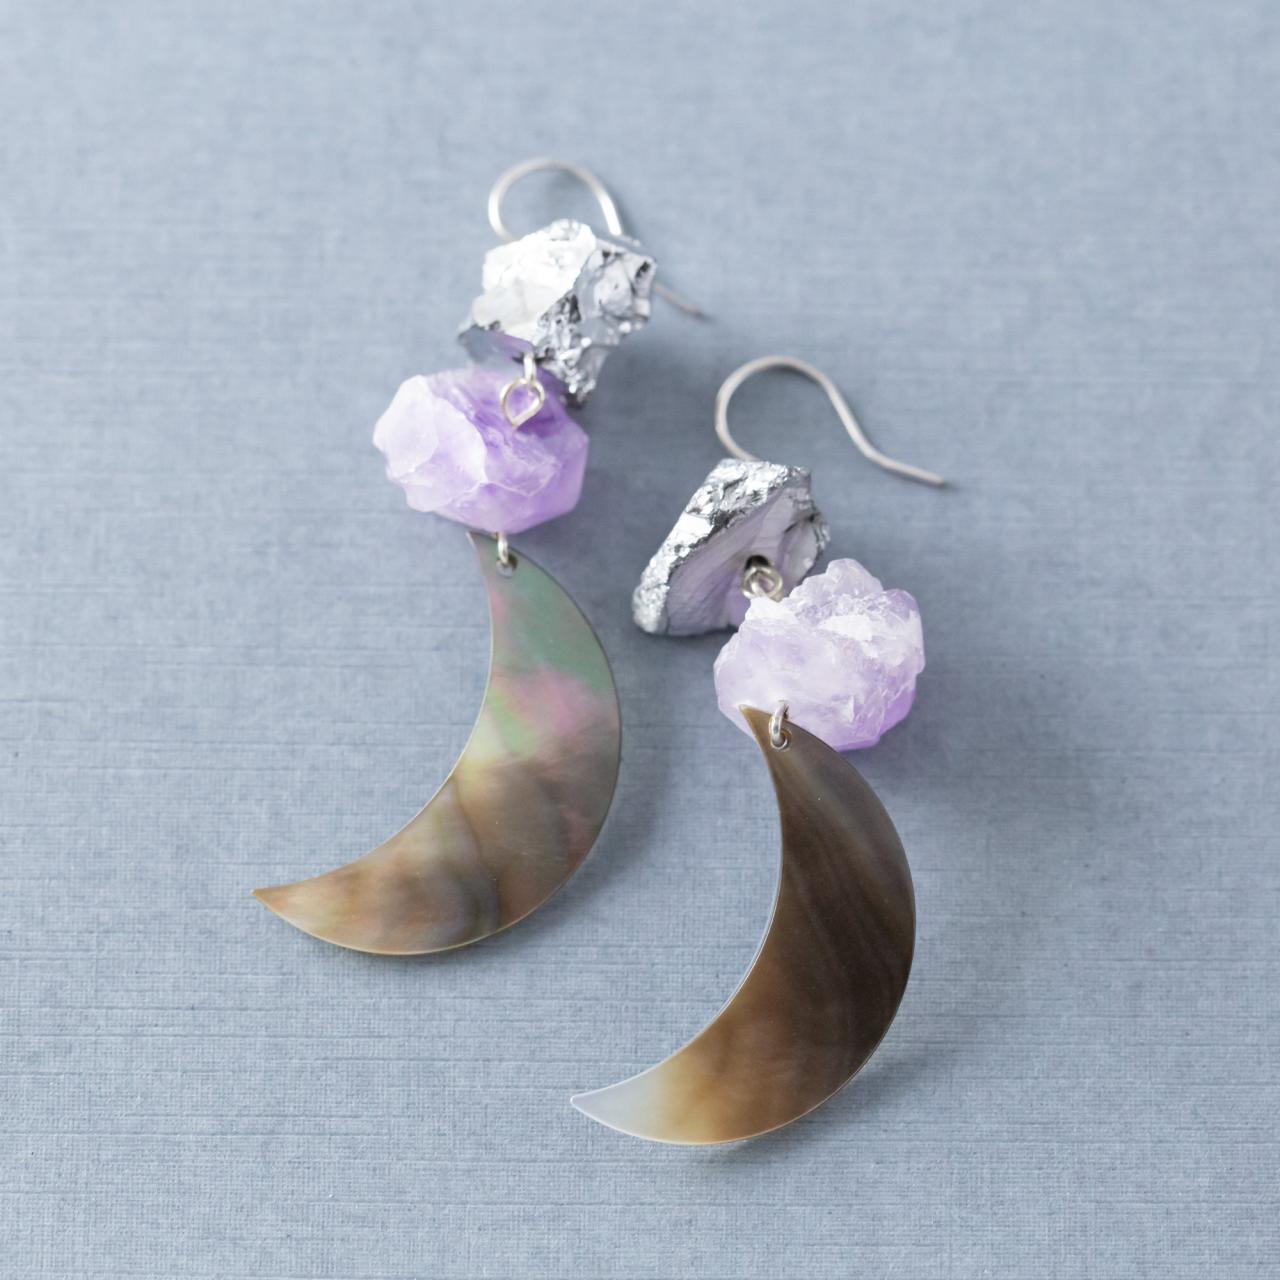 Mother Of Pearl Moon Earrings, Crescent Moon Earrings, Purple Crystal Earrings, Silver Crystal Earrings, Mother Of Pearl Jewelry